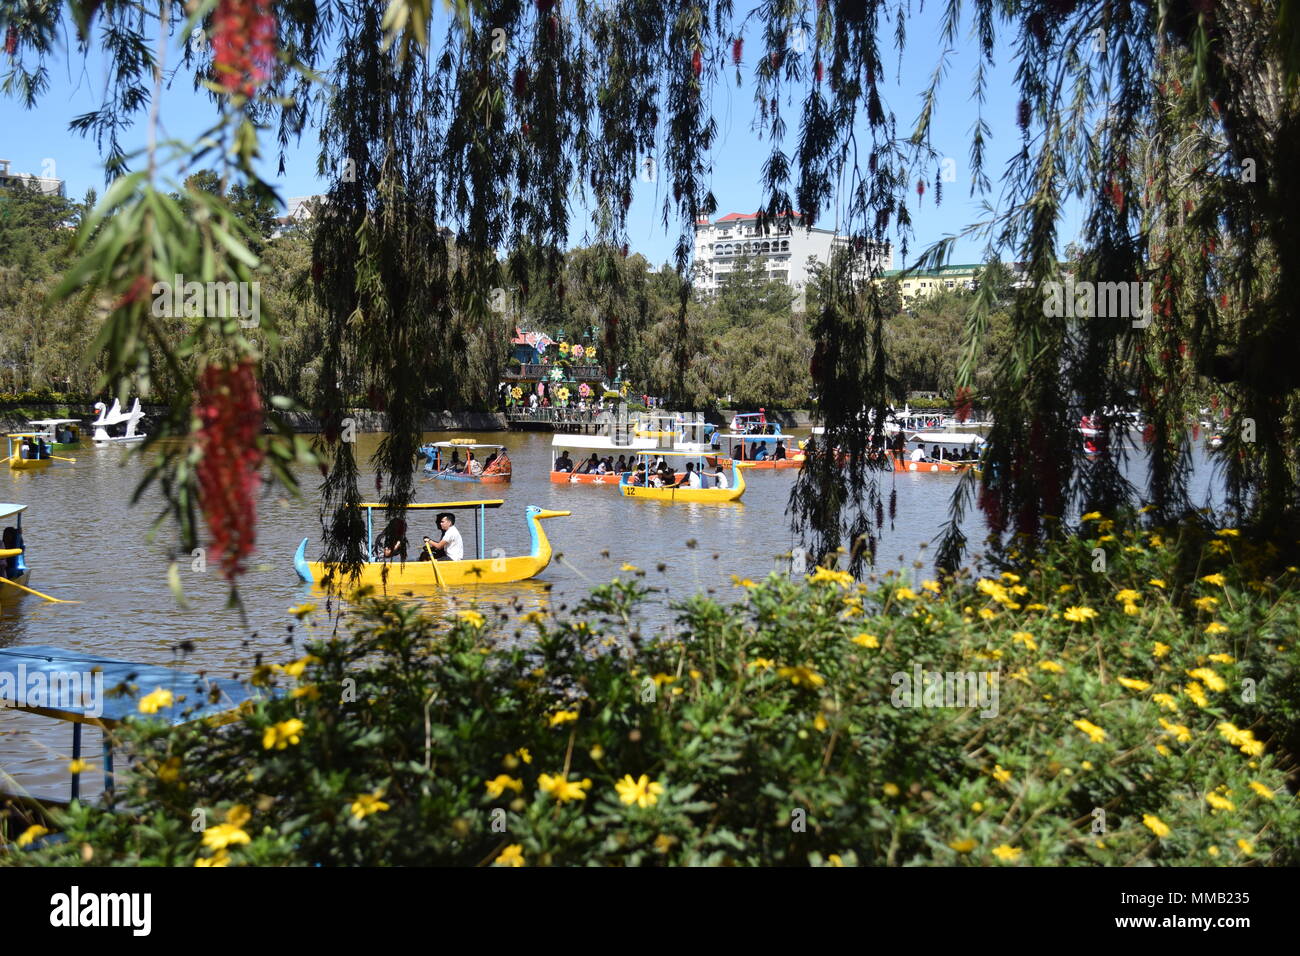 Family Boating at the Burnham Park Lake located within the heart of Baguio City. Baguio City is the Summer Capital of the Philippines. Stock Photo